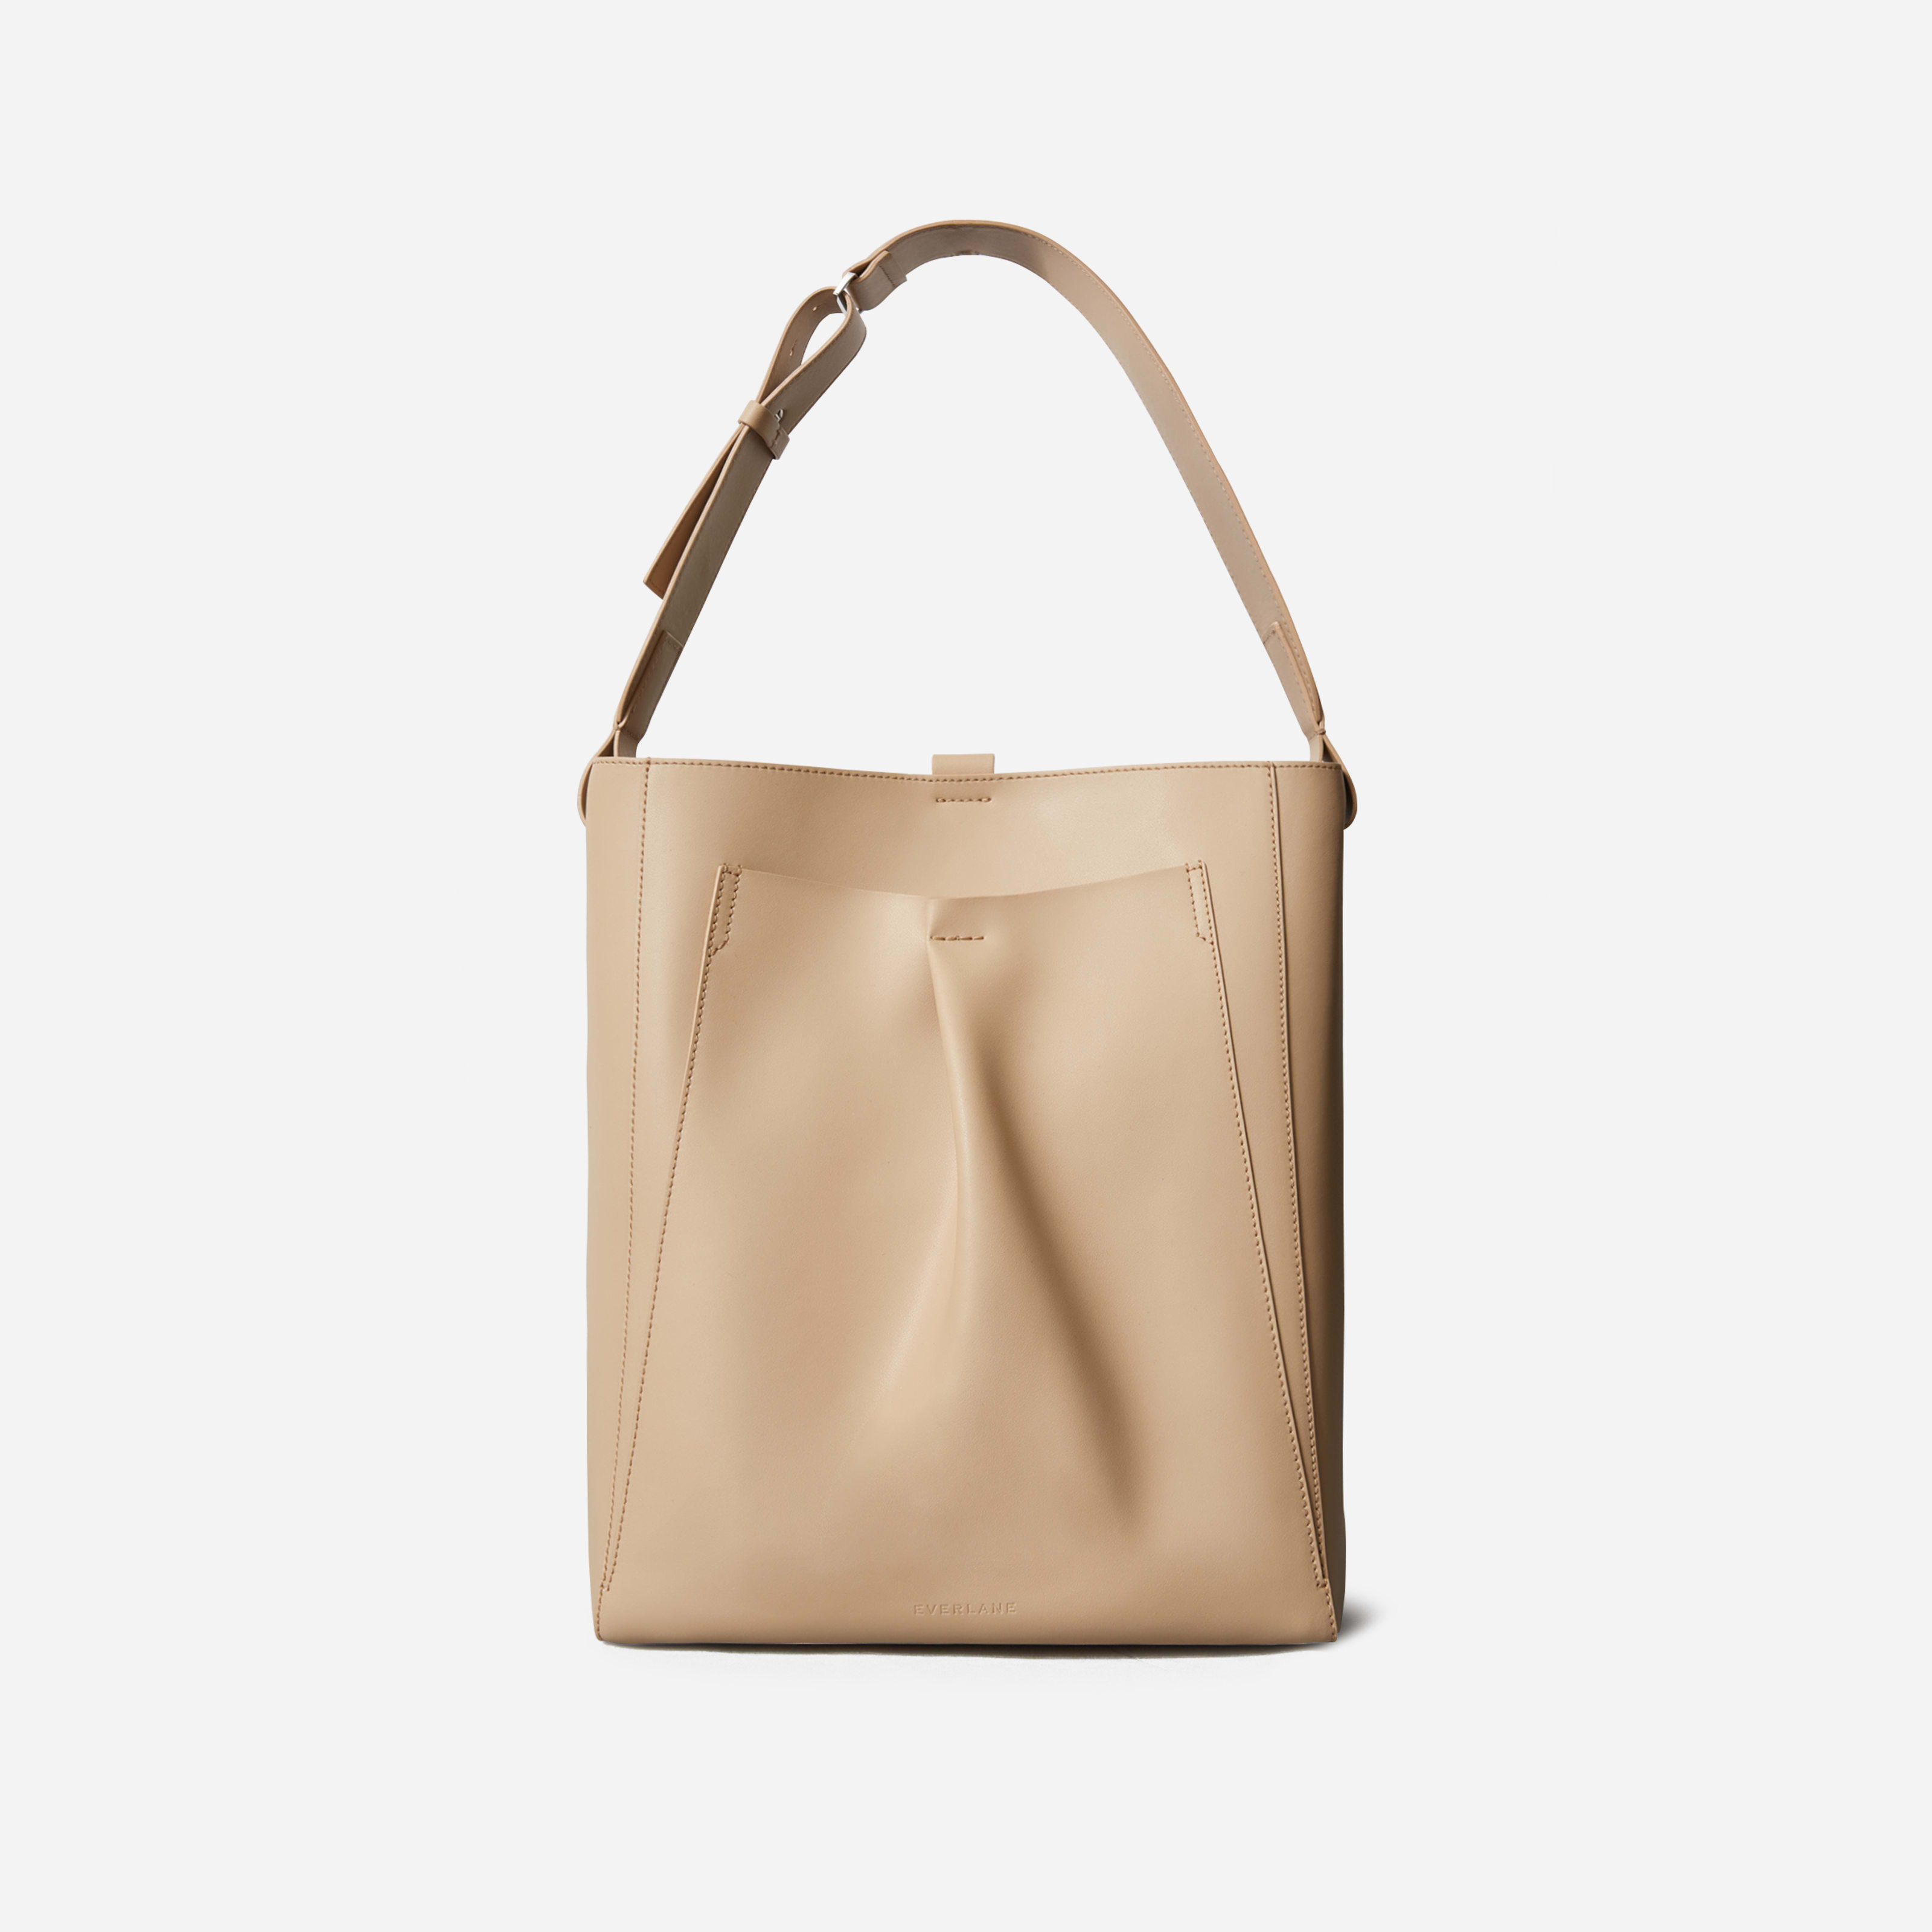 studio bag by everlane in light taupe